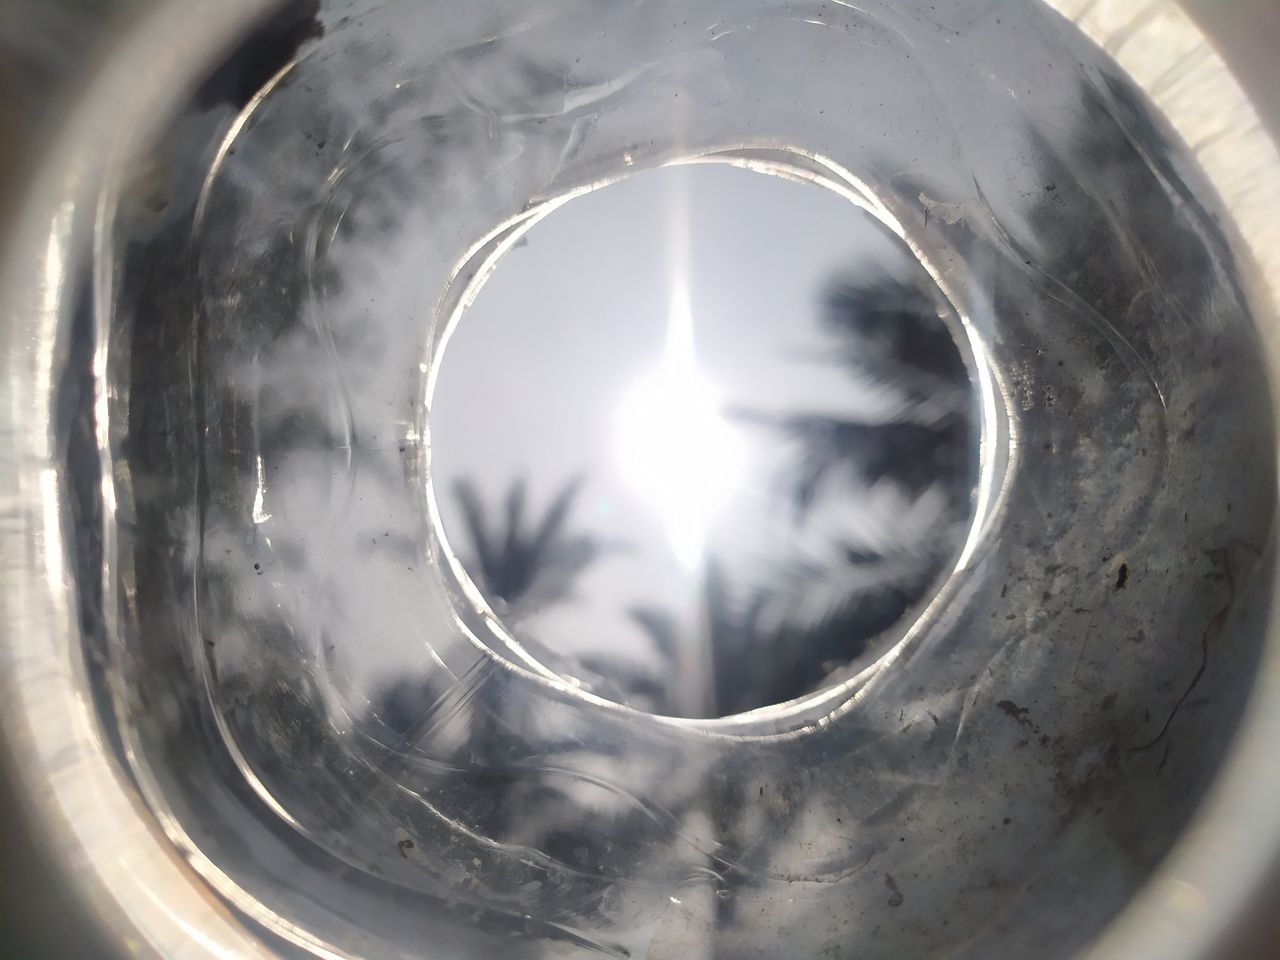 CLOSE-UP OF GLASS WITH REFLECTION OF HOLE